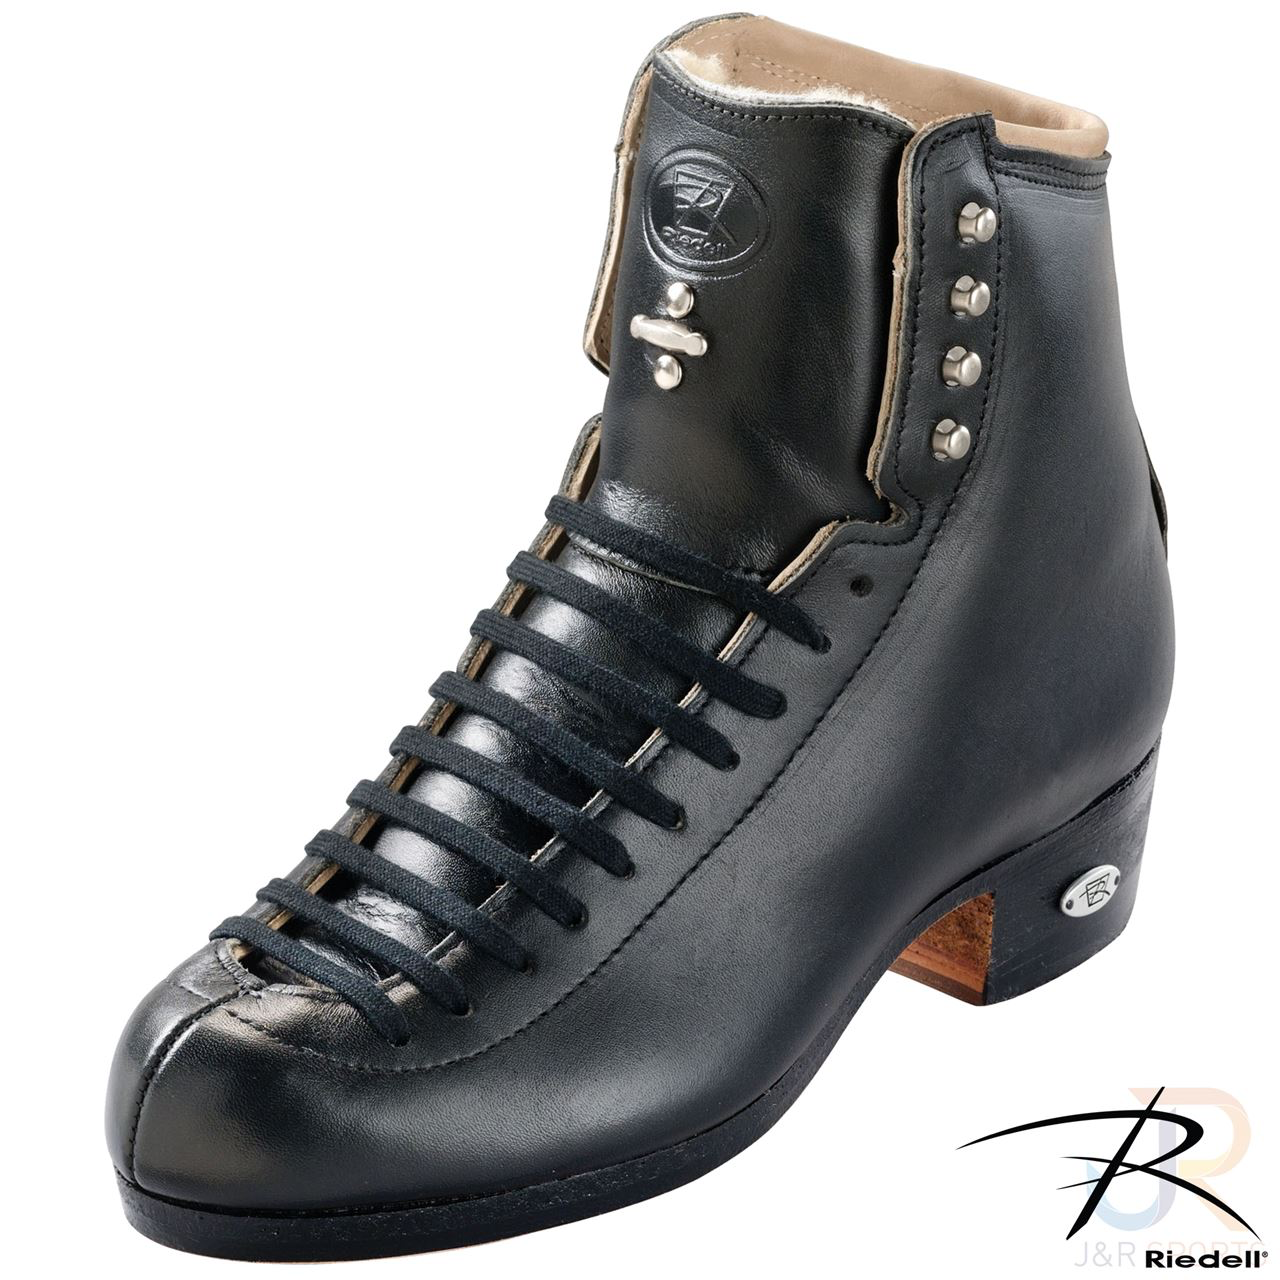 Riedell 336 TRIBUTE High Top Skate Boots - Black